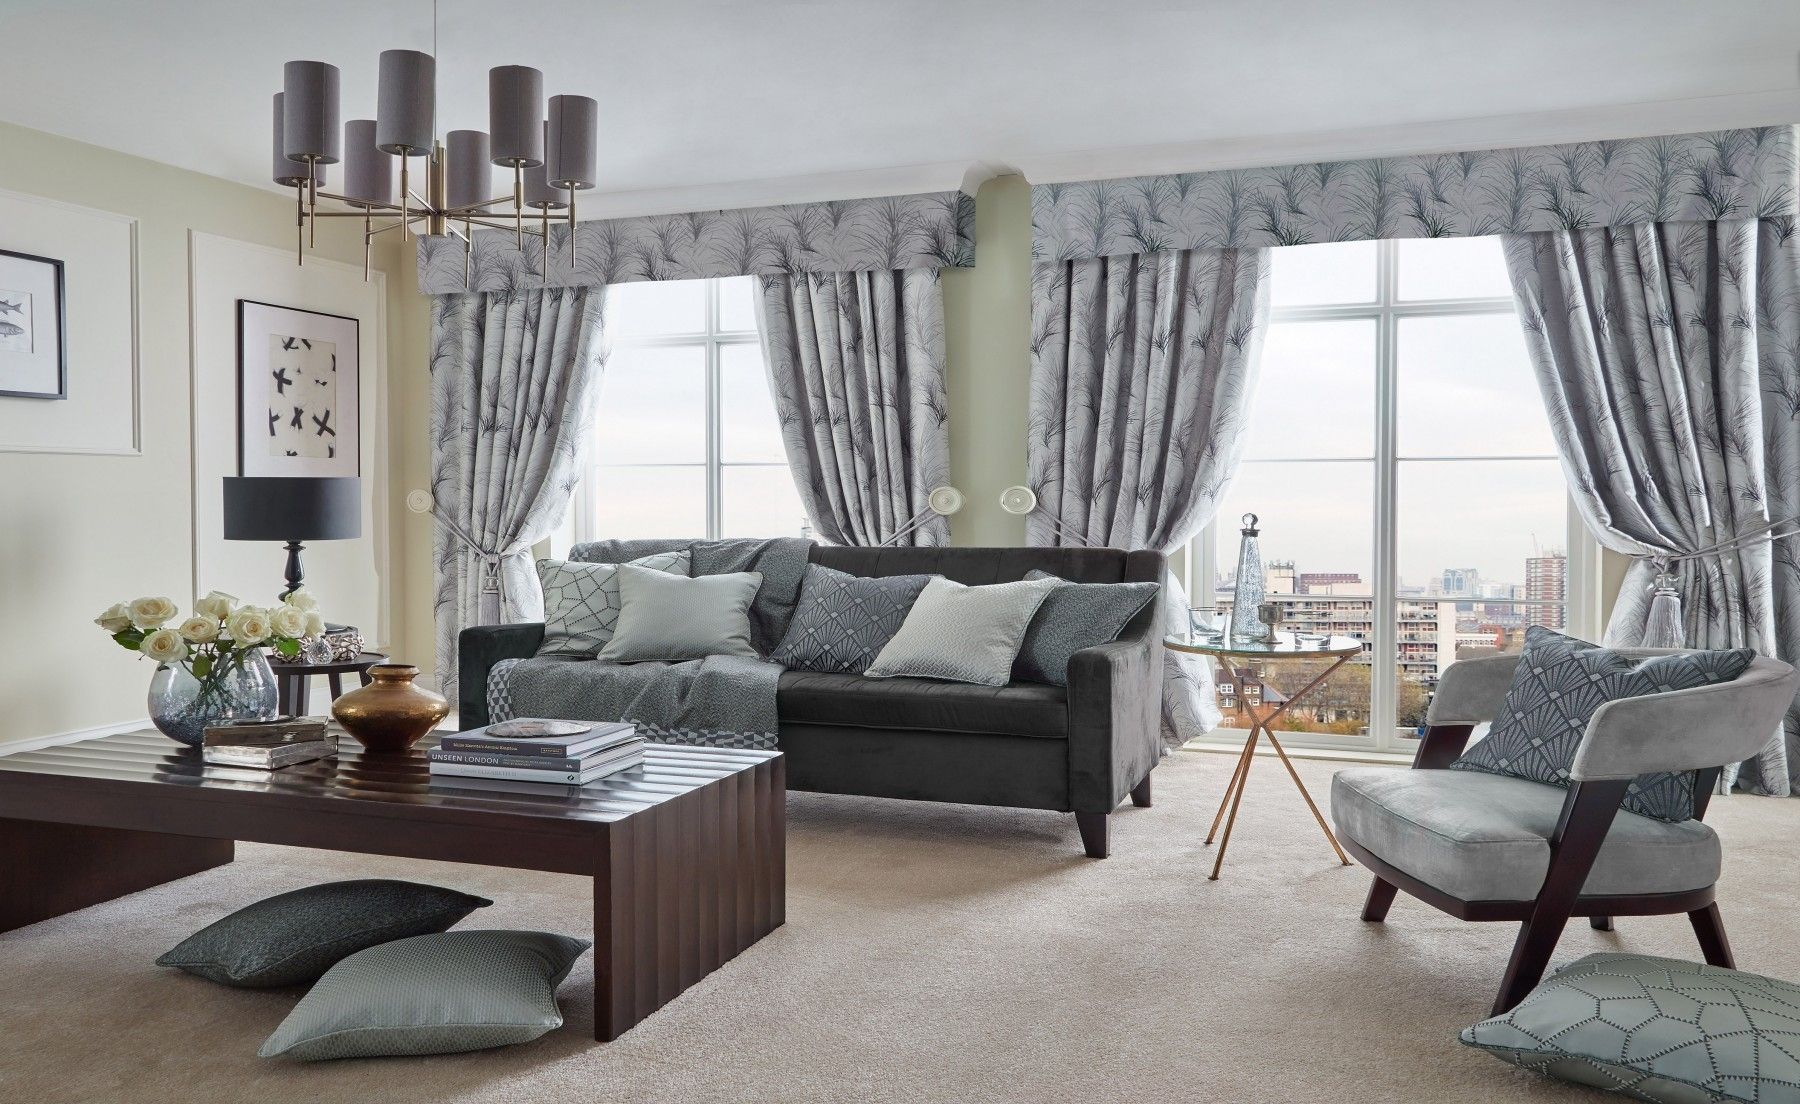 Why Should You Invest In Good Quality Curtains?